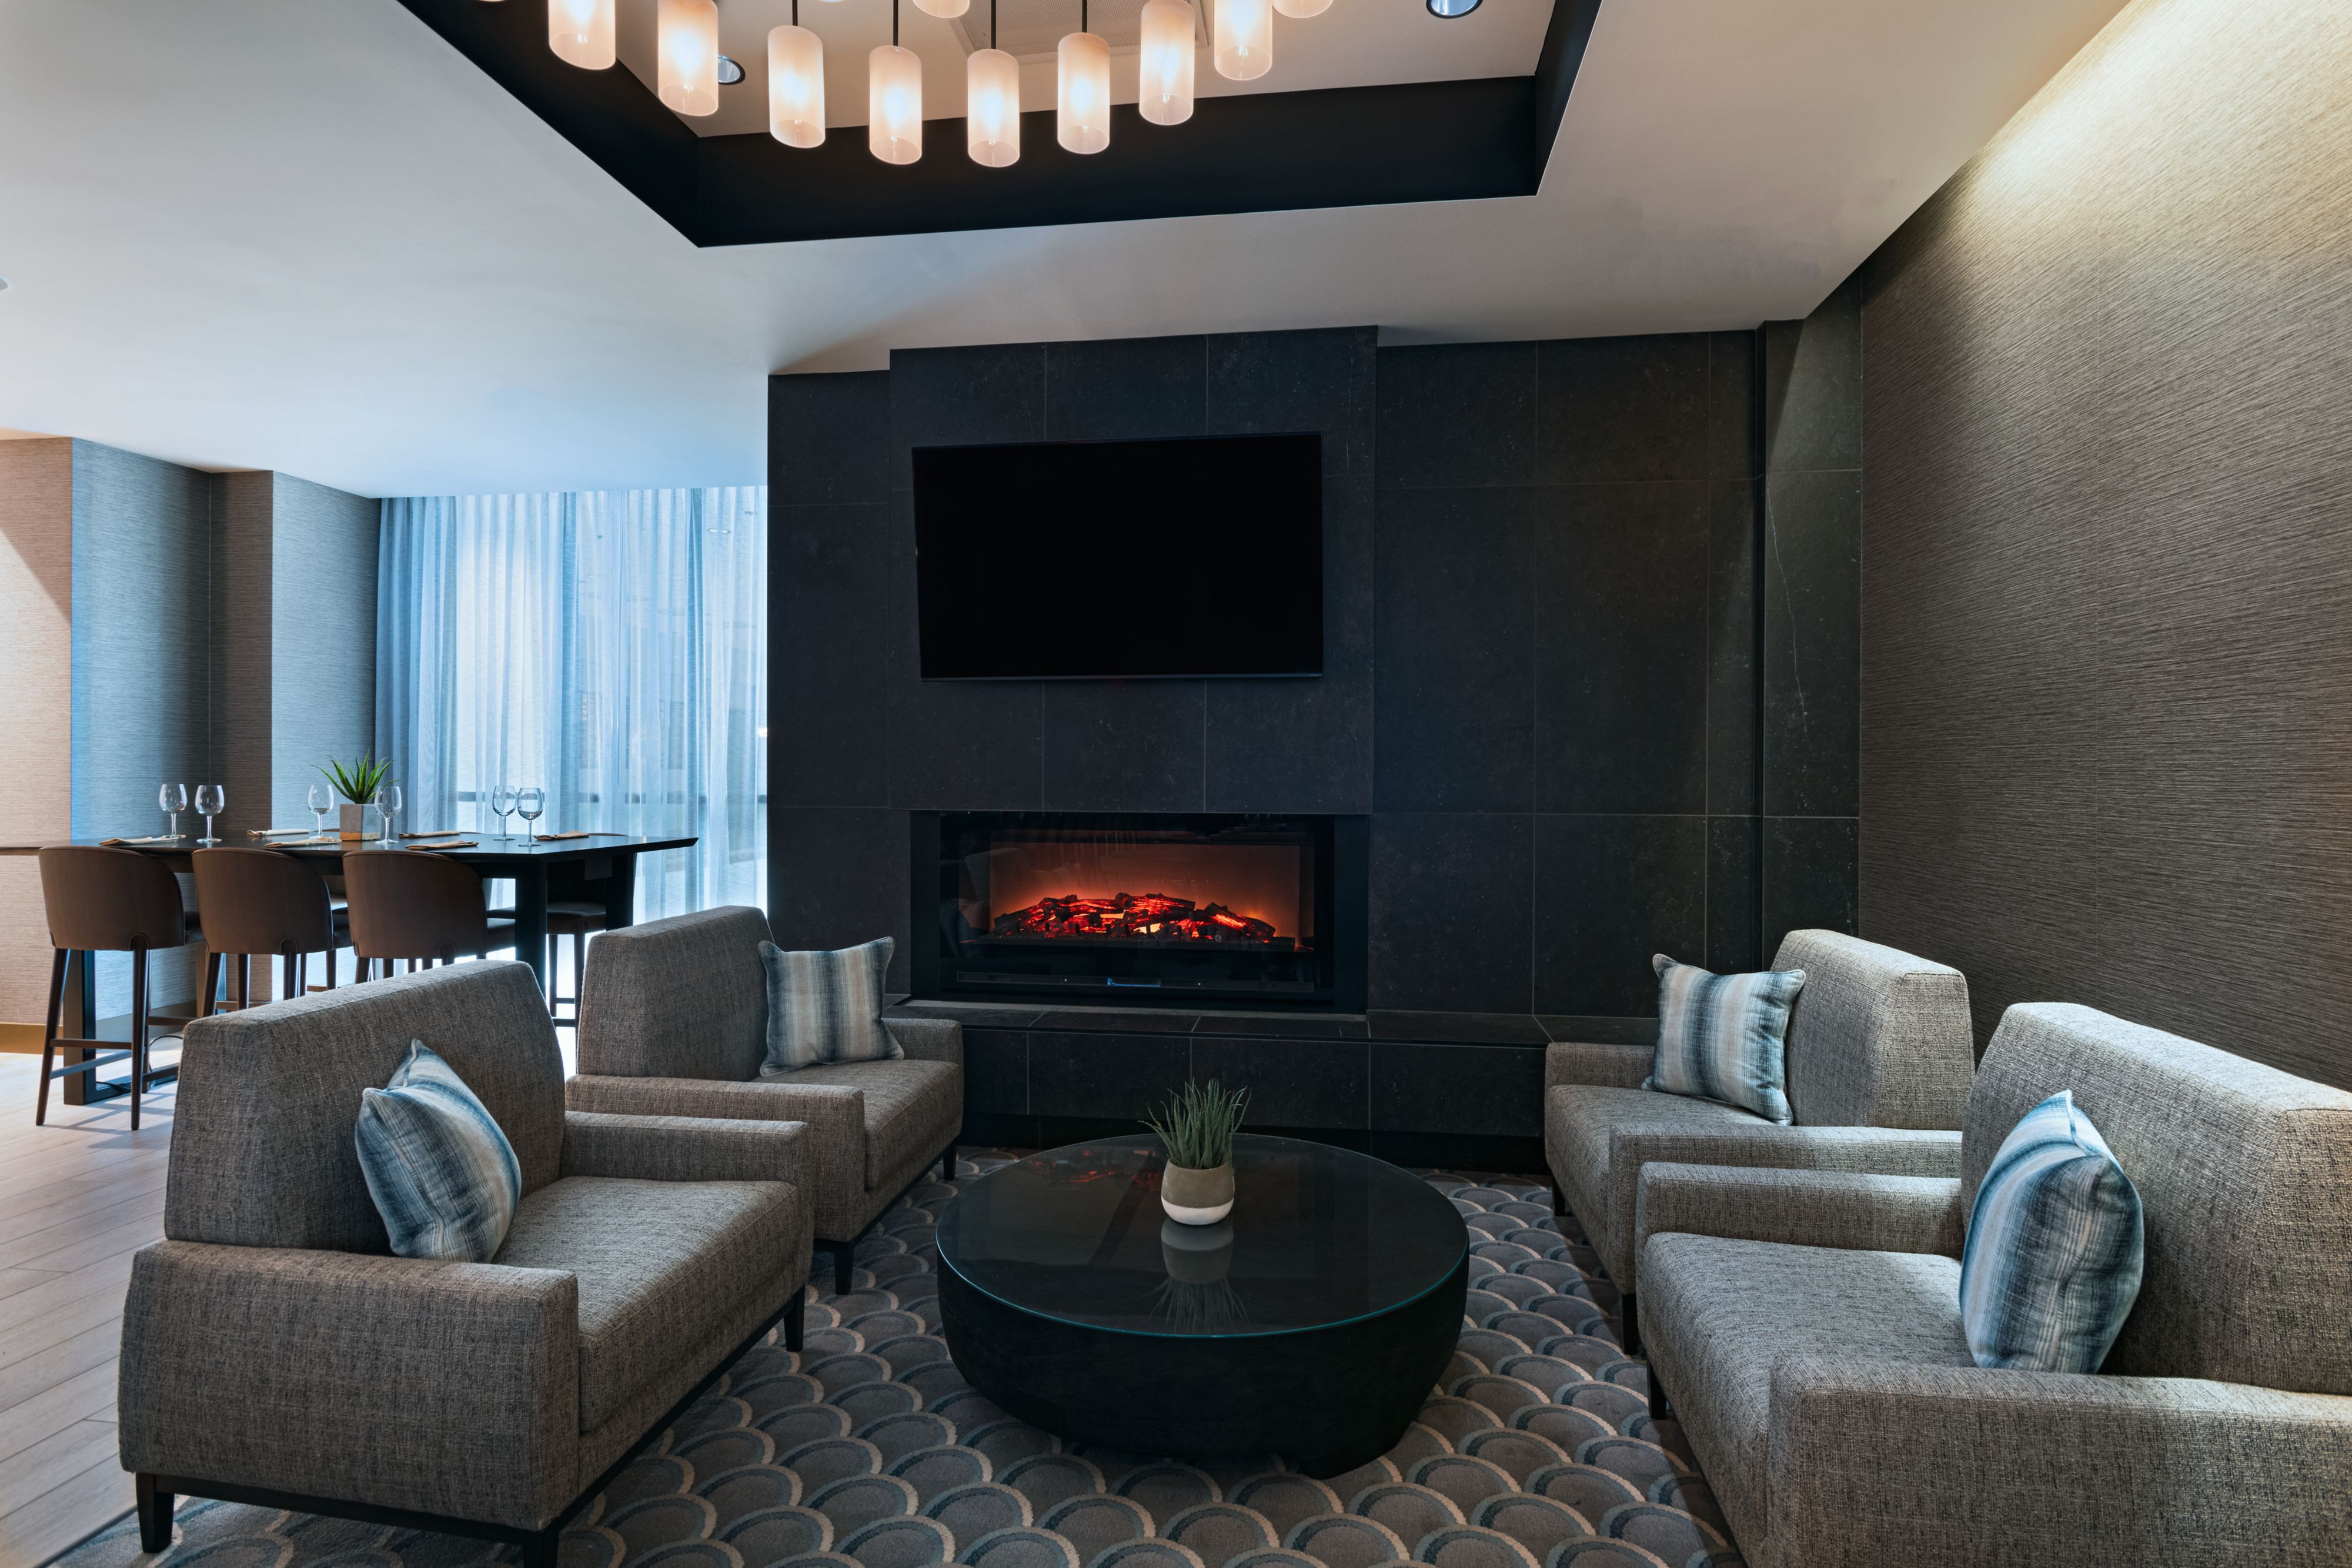 Cozy up to the fireplace in Curate.